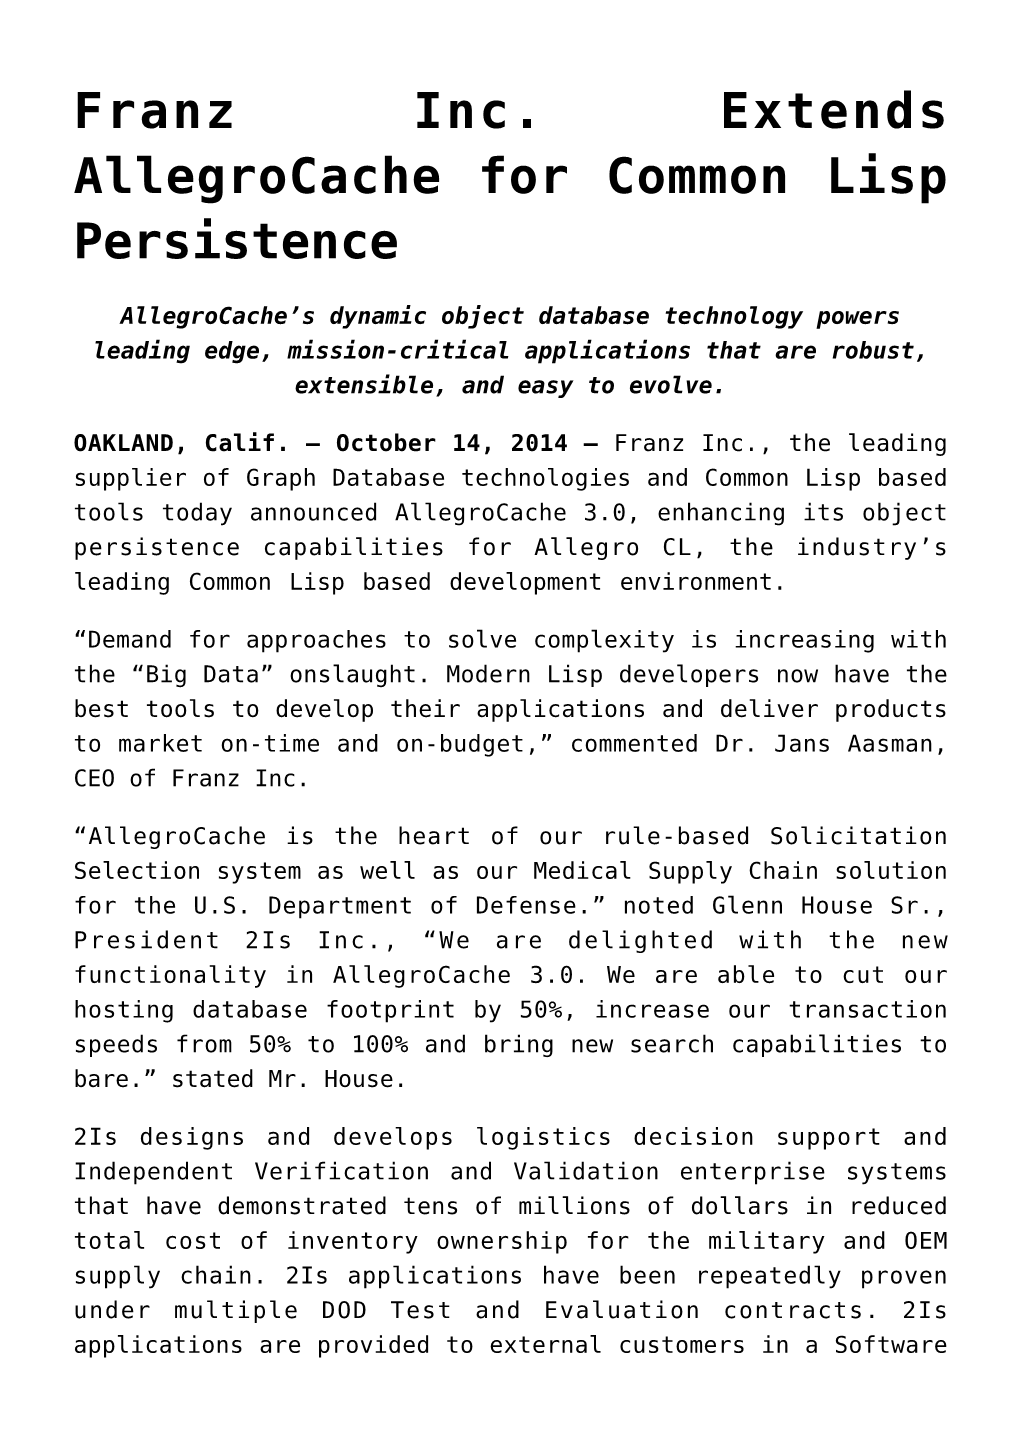 Franz Inc. Extends Allegrocache for Common Lisp Persistence